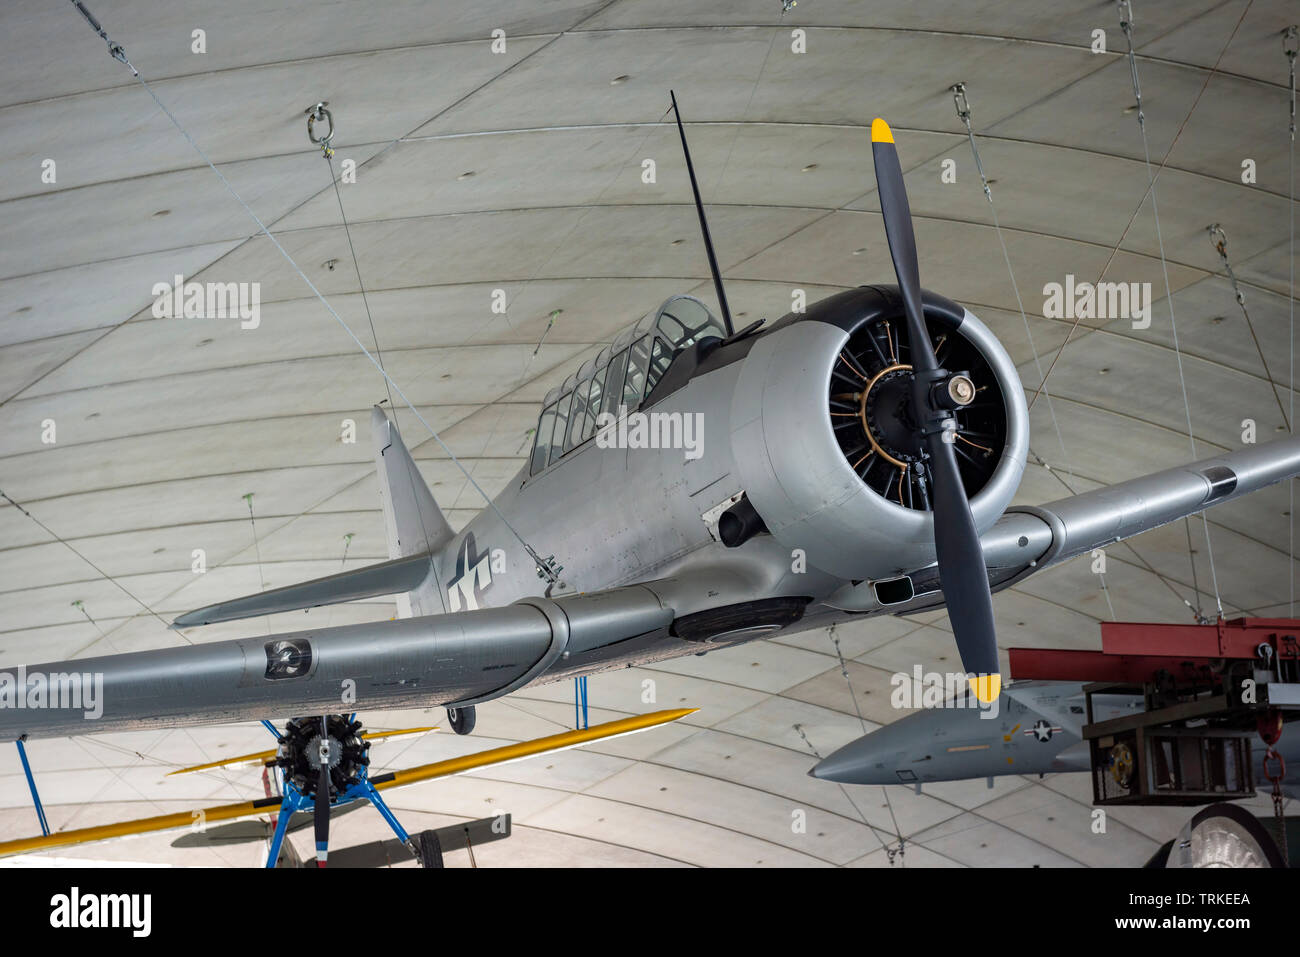 North American T-6 Texan, otherwise known as the Harvard by British Commonwealth air forces, at the Imperial War Museum, Duxford, Cambridgeshire, UK Stock Photo